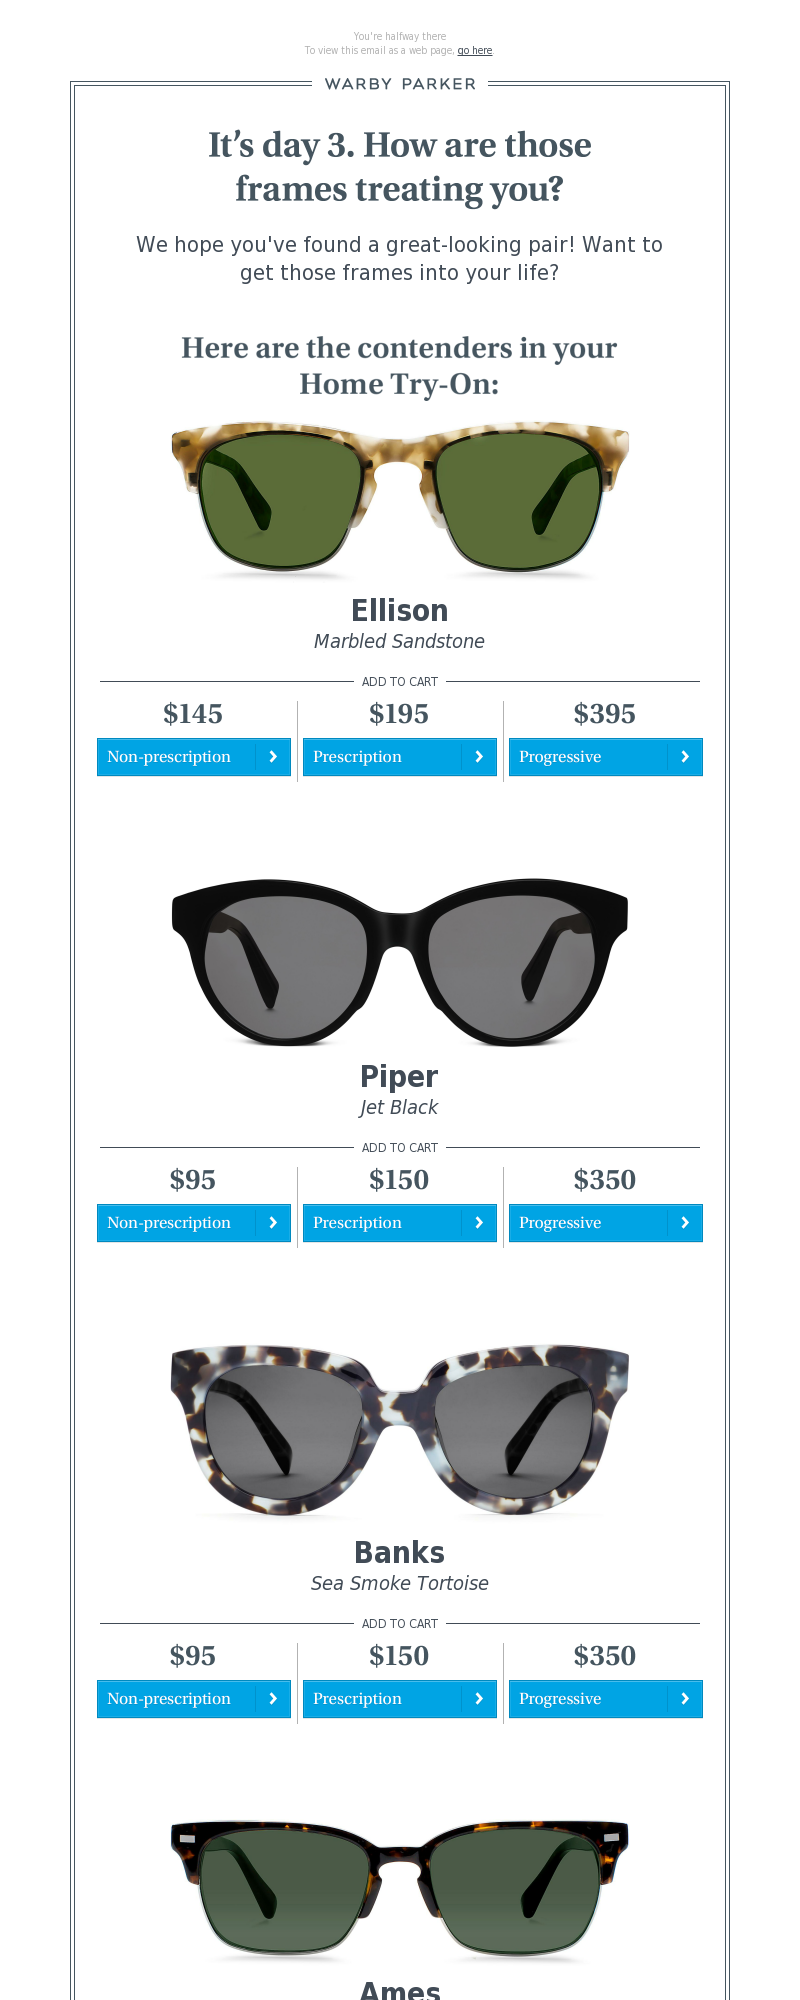 The Warby Parker Email Marketing Teardown - Email Mastery